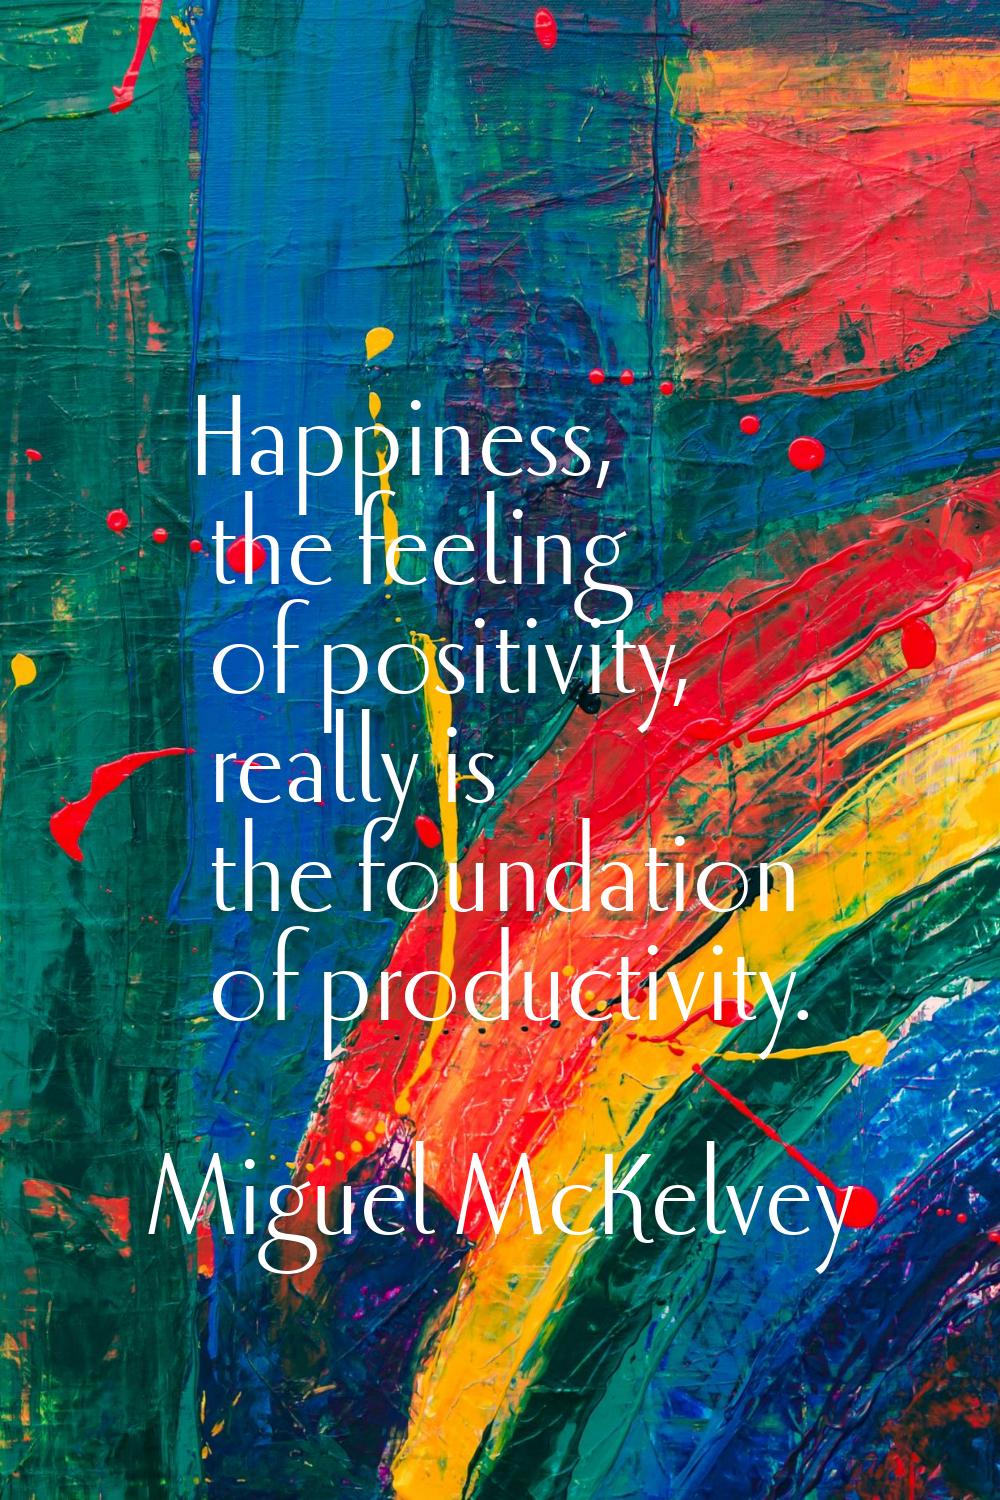 Happiness, the feeling of positivity, really is the foundation of productivity.